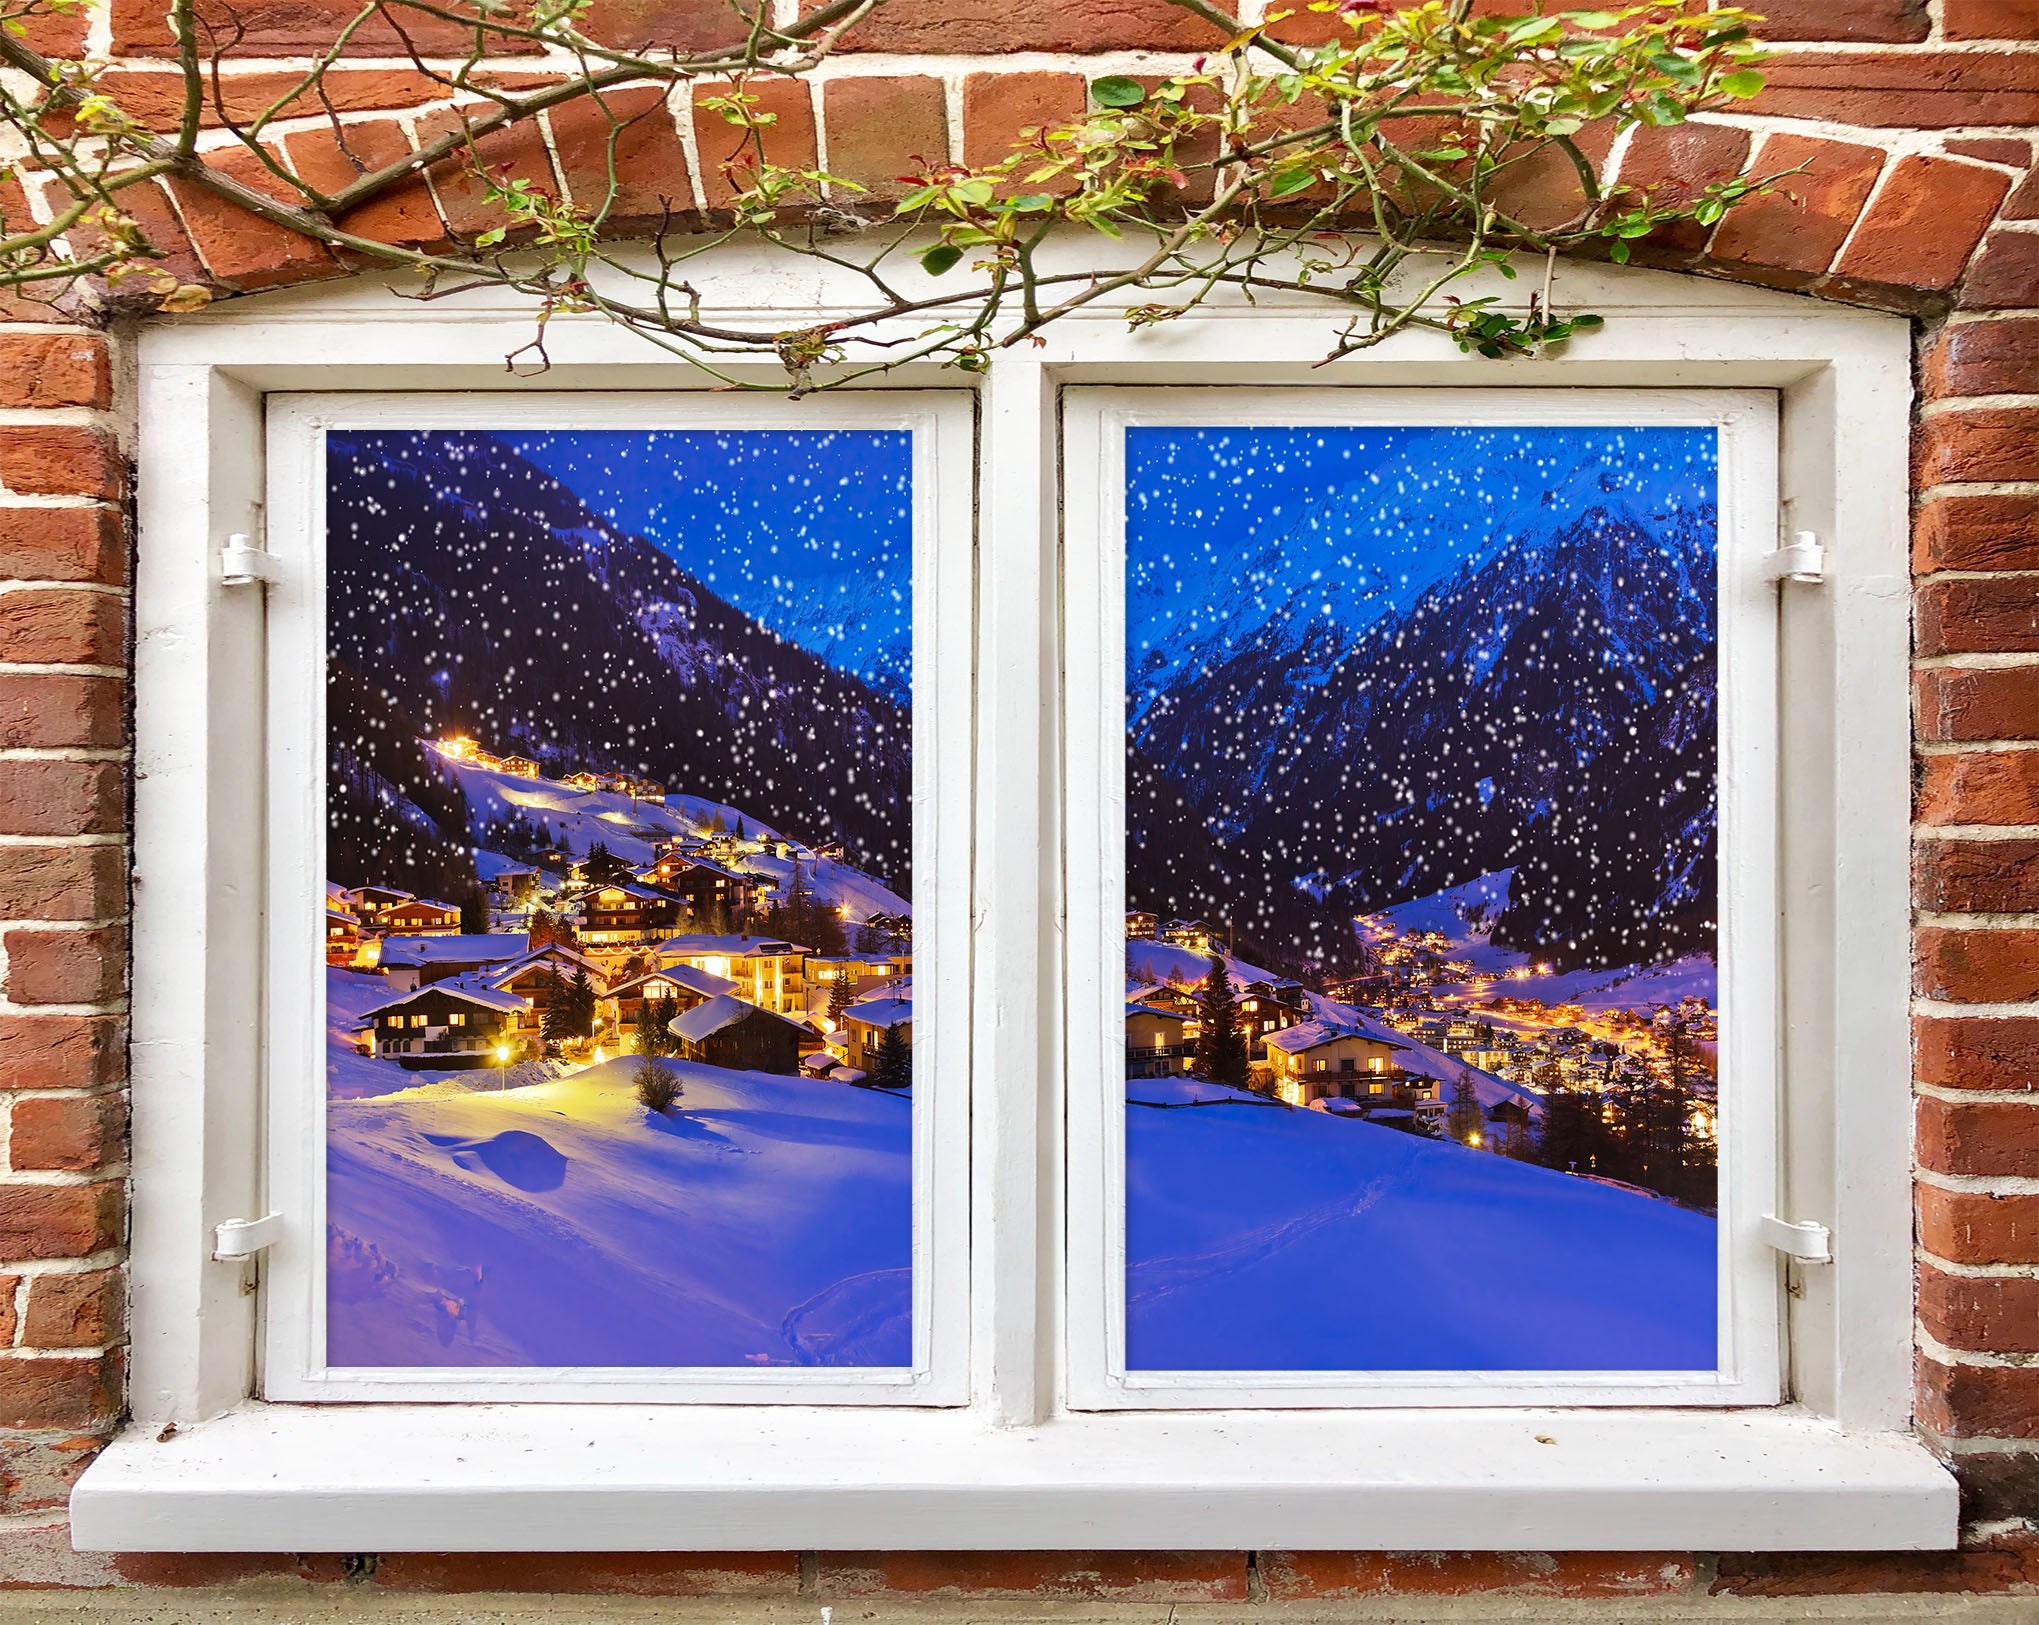 3D Snow Mountain House 43136 Christmas Window Film Print Sticker Cling Stained Glass Xmas